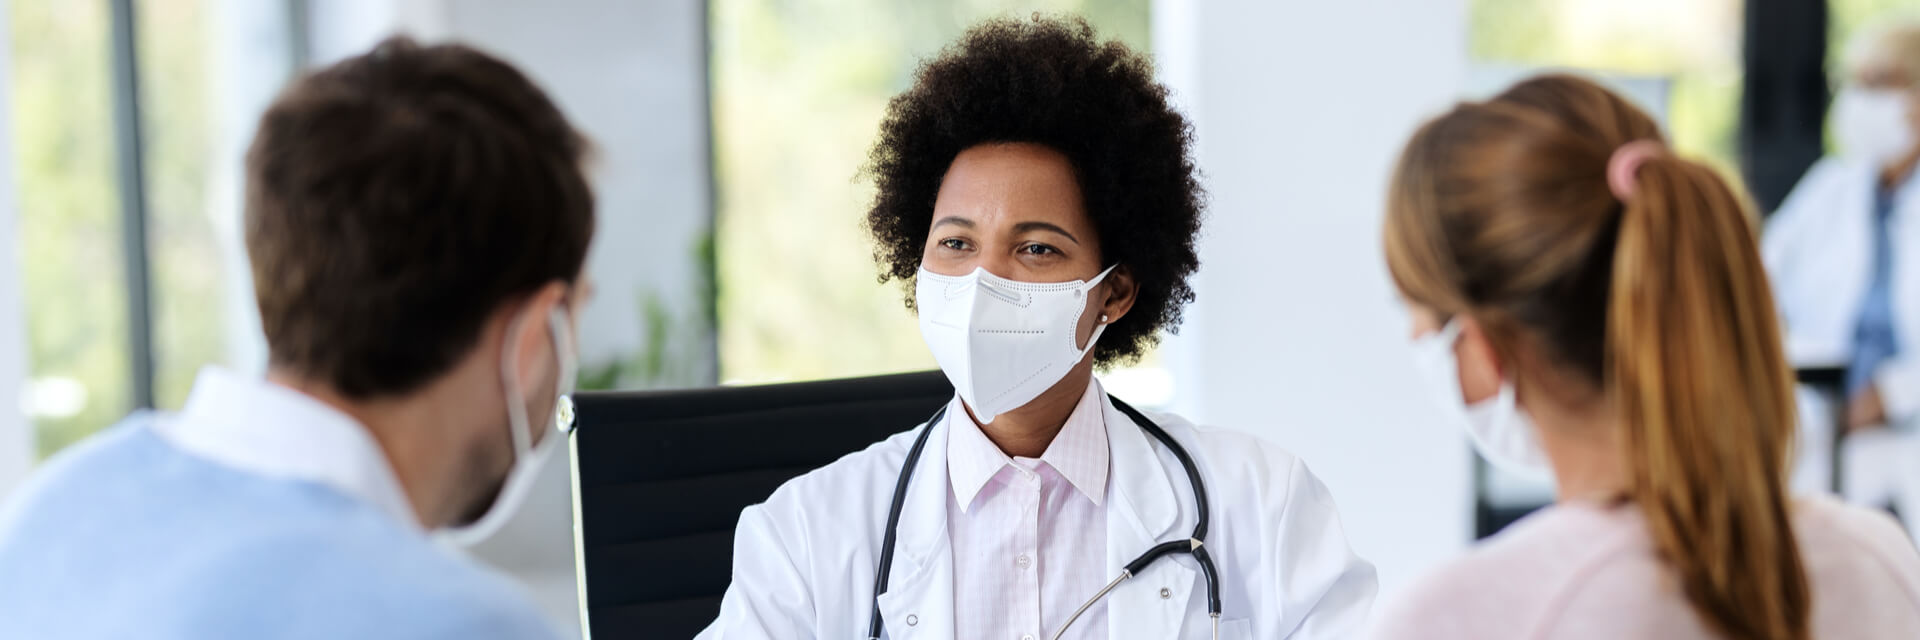 Black female doctor talking to a couple while wearing protective face mask